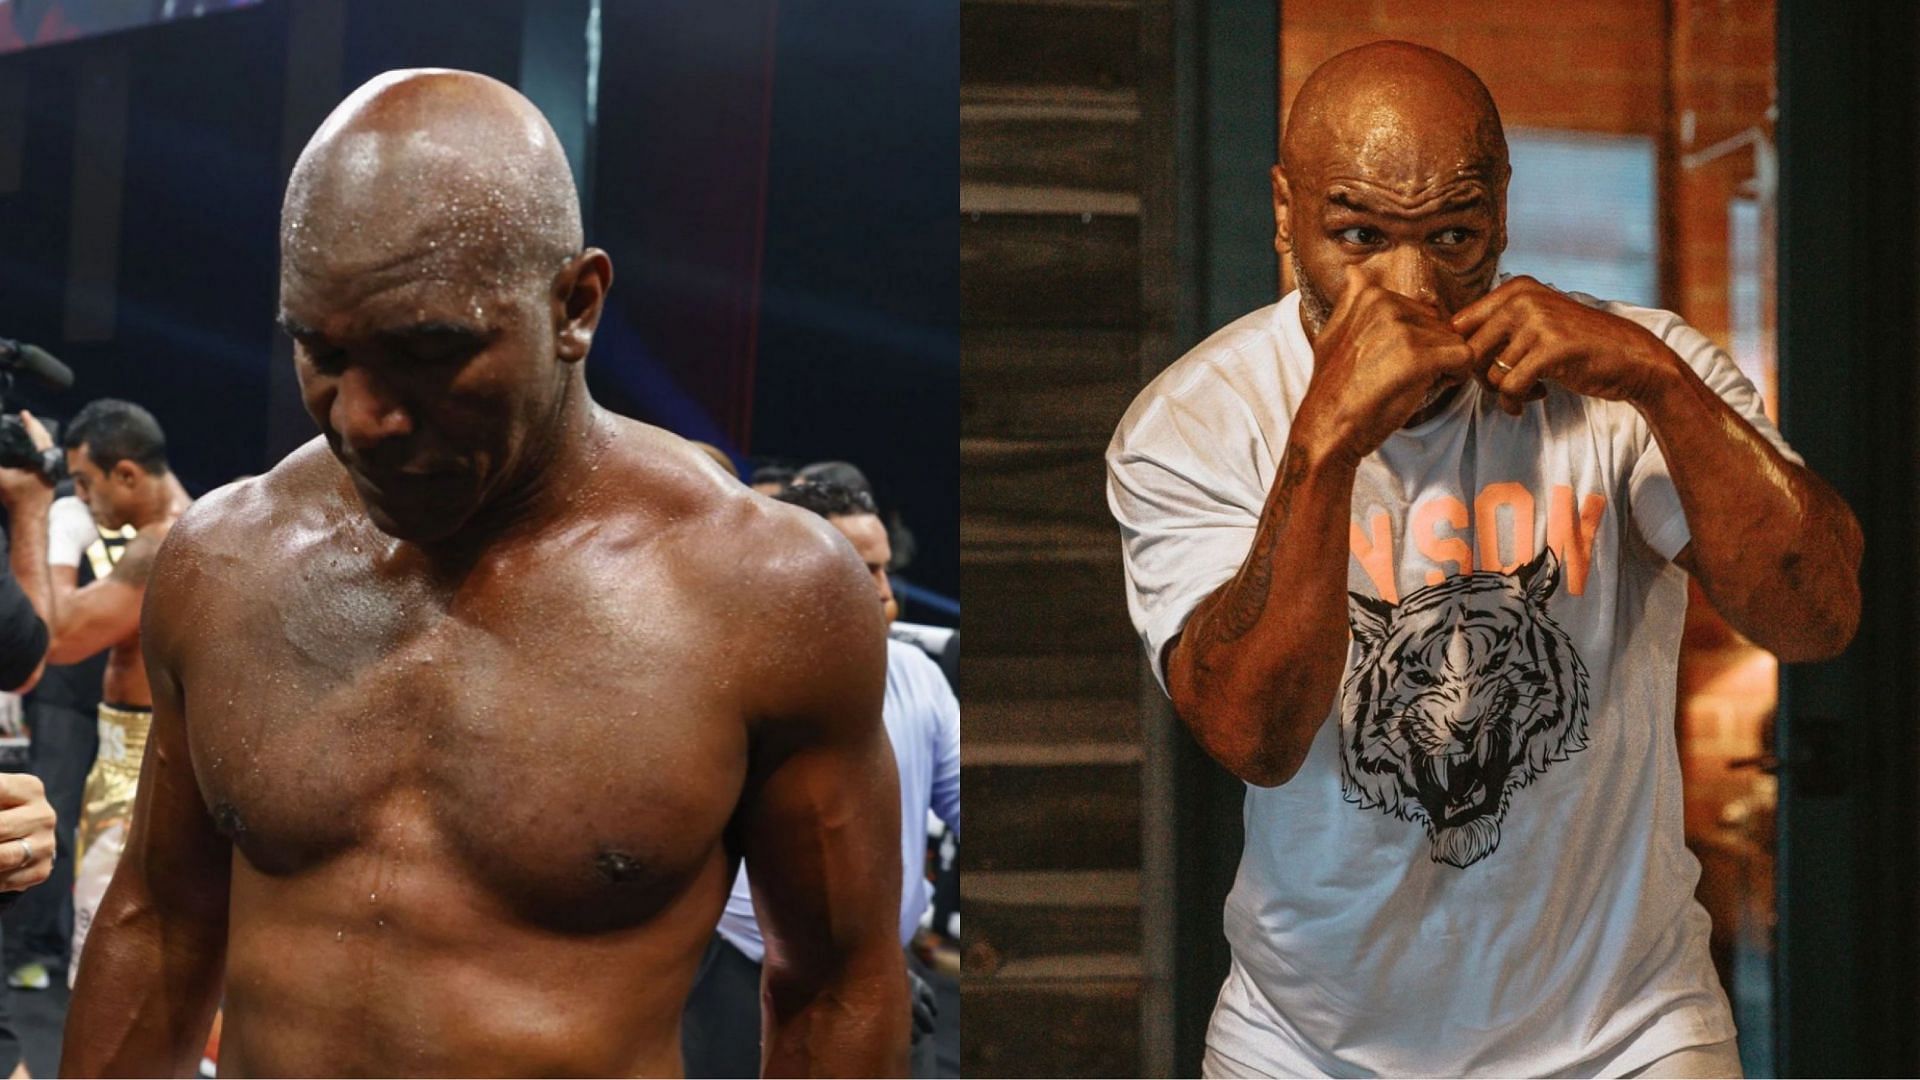 Evander Holyfield, Mike Tyson (@miketyson) [images courtesy of Getty and Instagram]